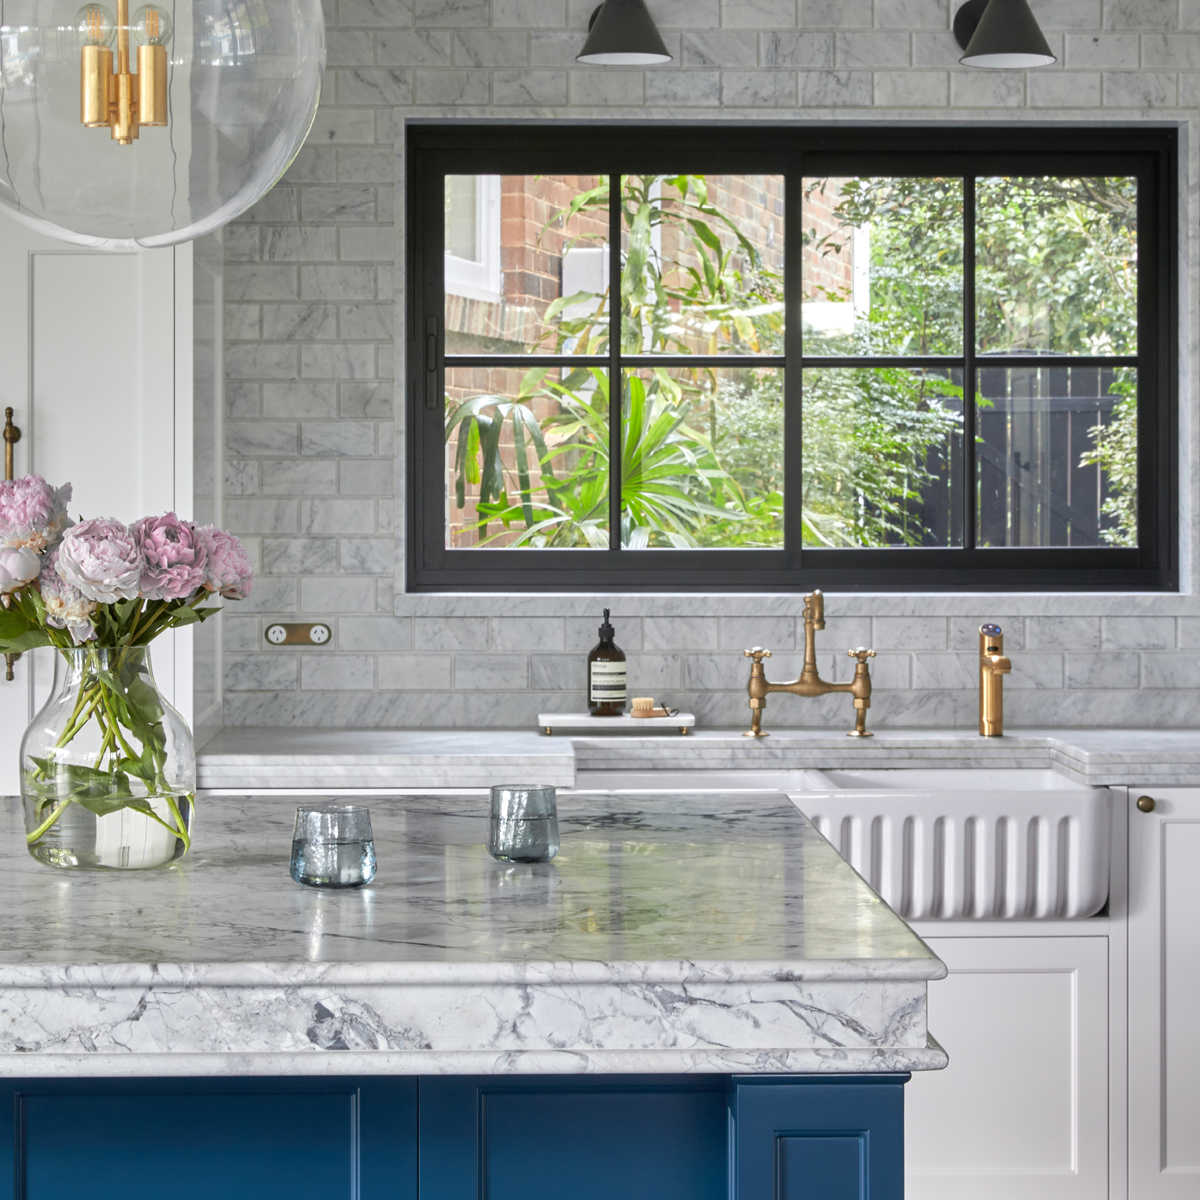 Shaws Ribchester 800 sink - Roseville House by Danielle Victoria. Blue, White and Brass Modern Hamptons Kitchen and interior design Australia.